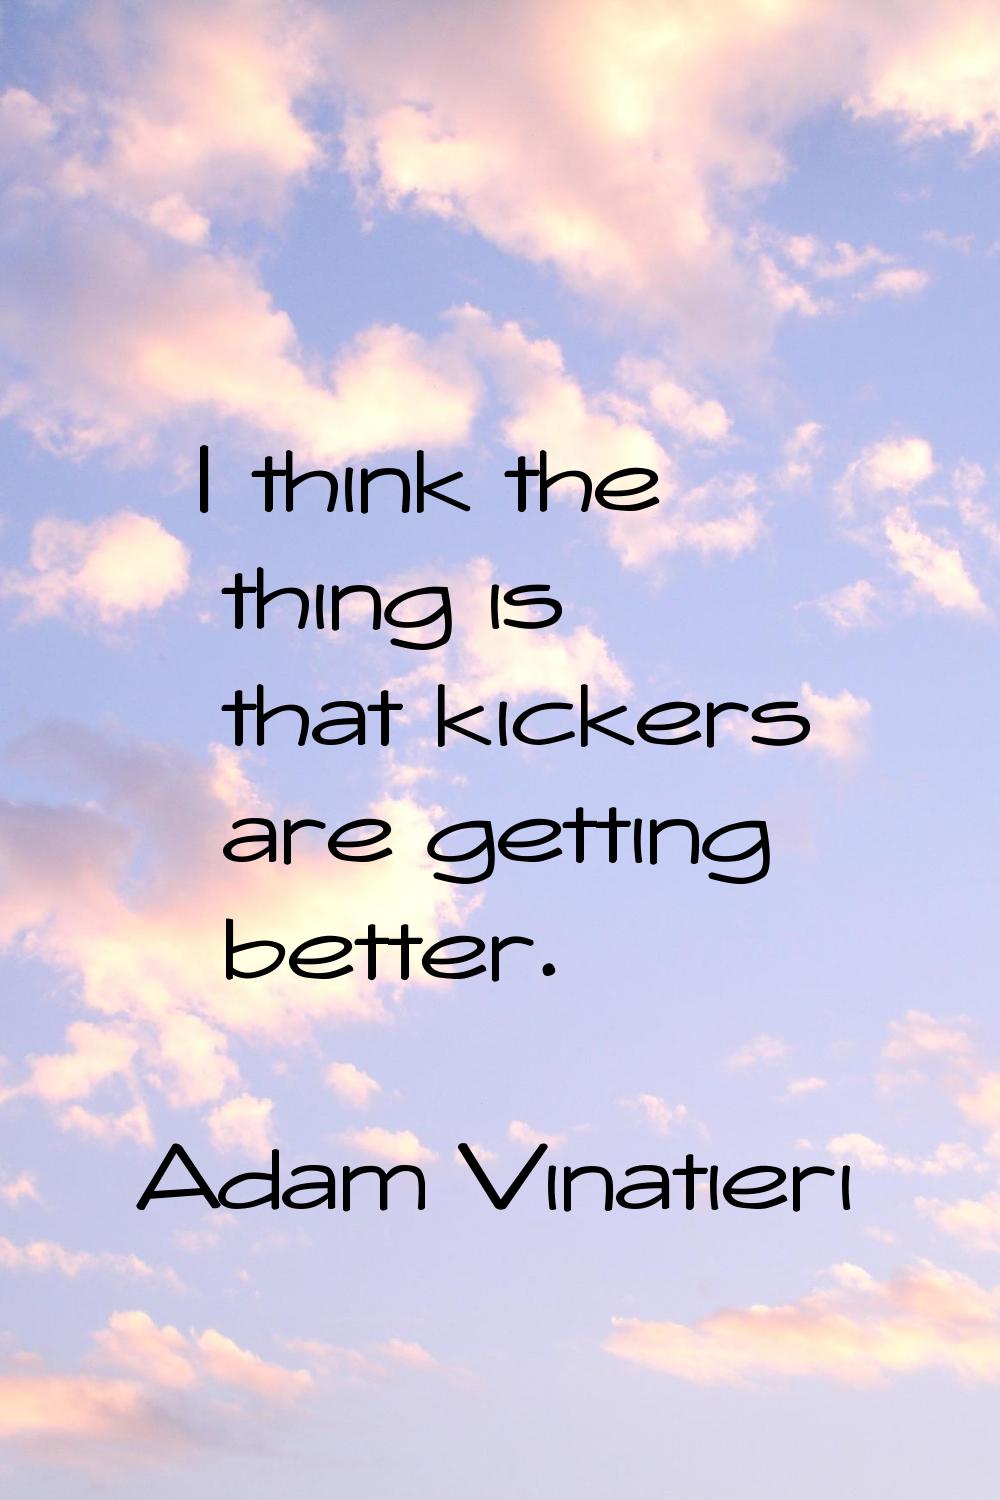 I think the thing is that kickers are getting better.